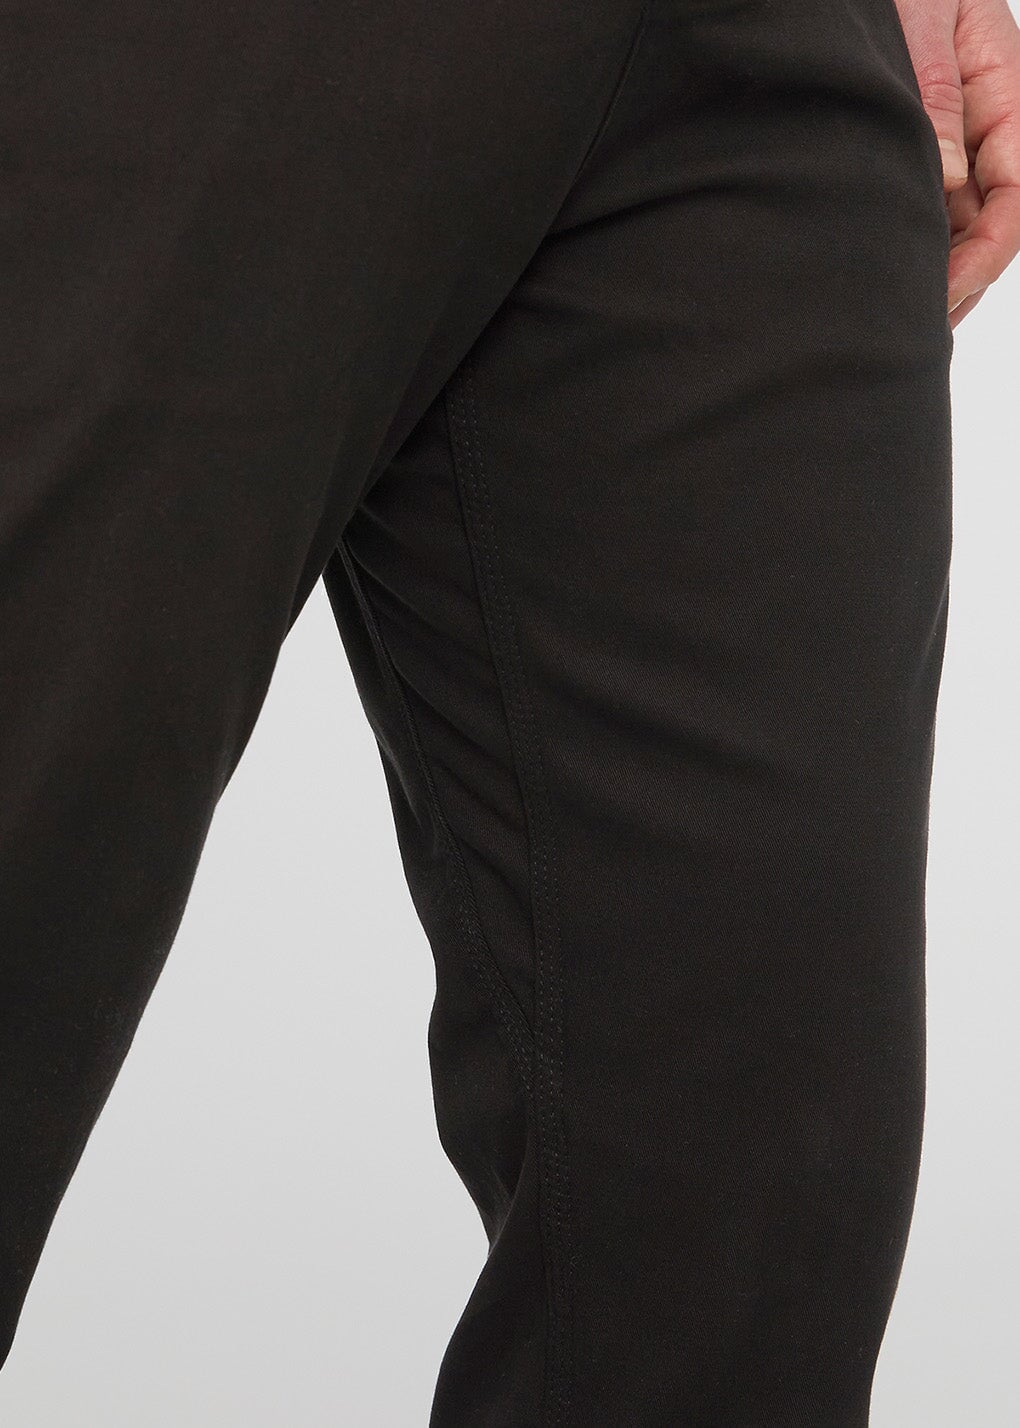 Women's High-Rise Tapered Ankle Chino Pants - A New Day™ Black XL